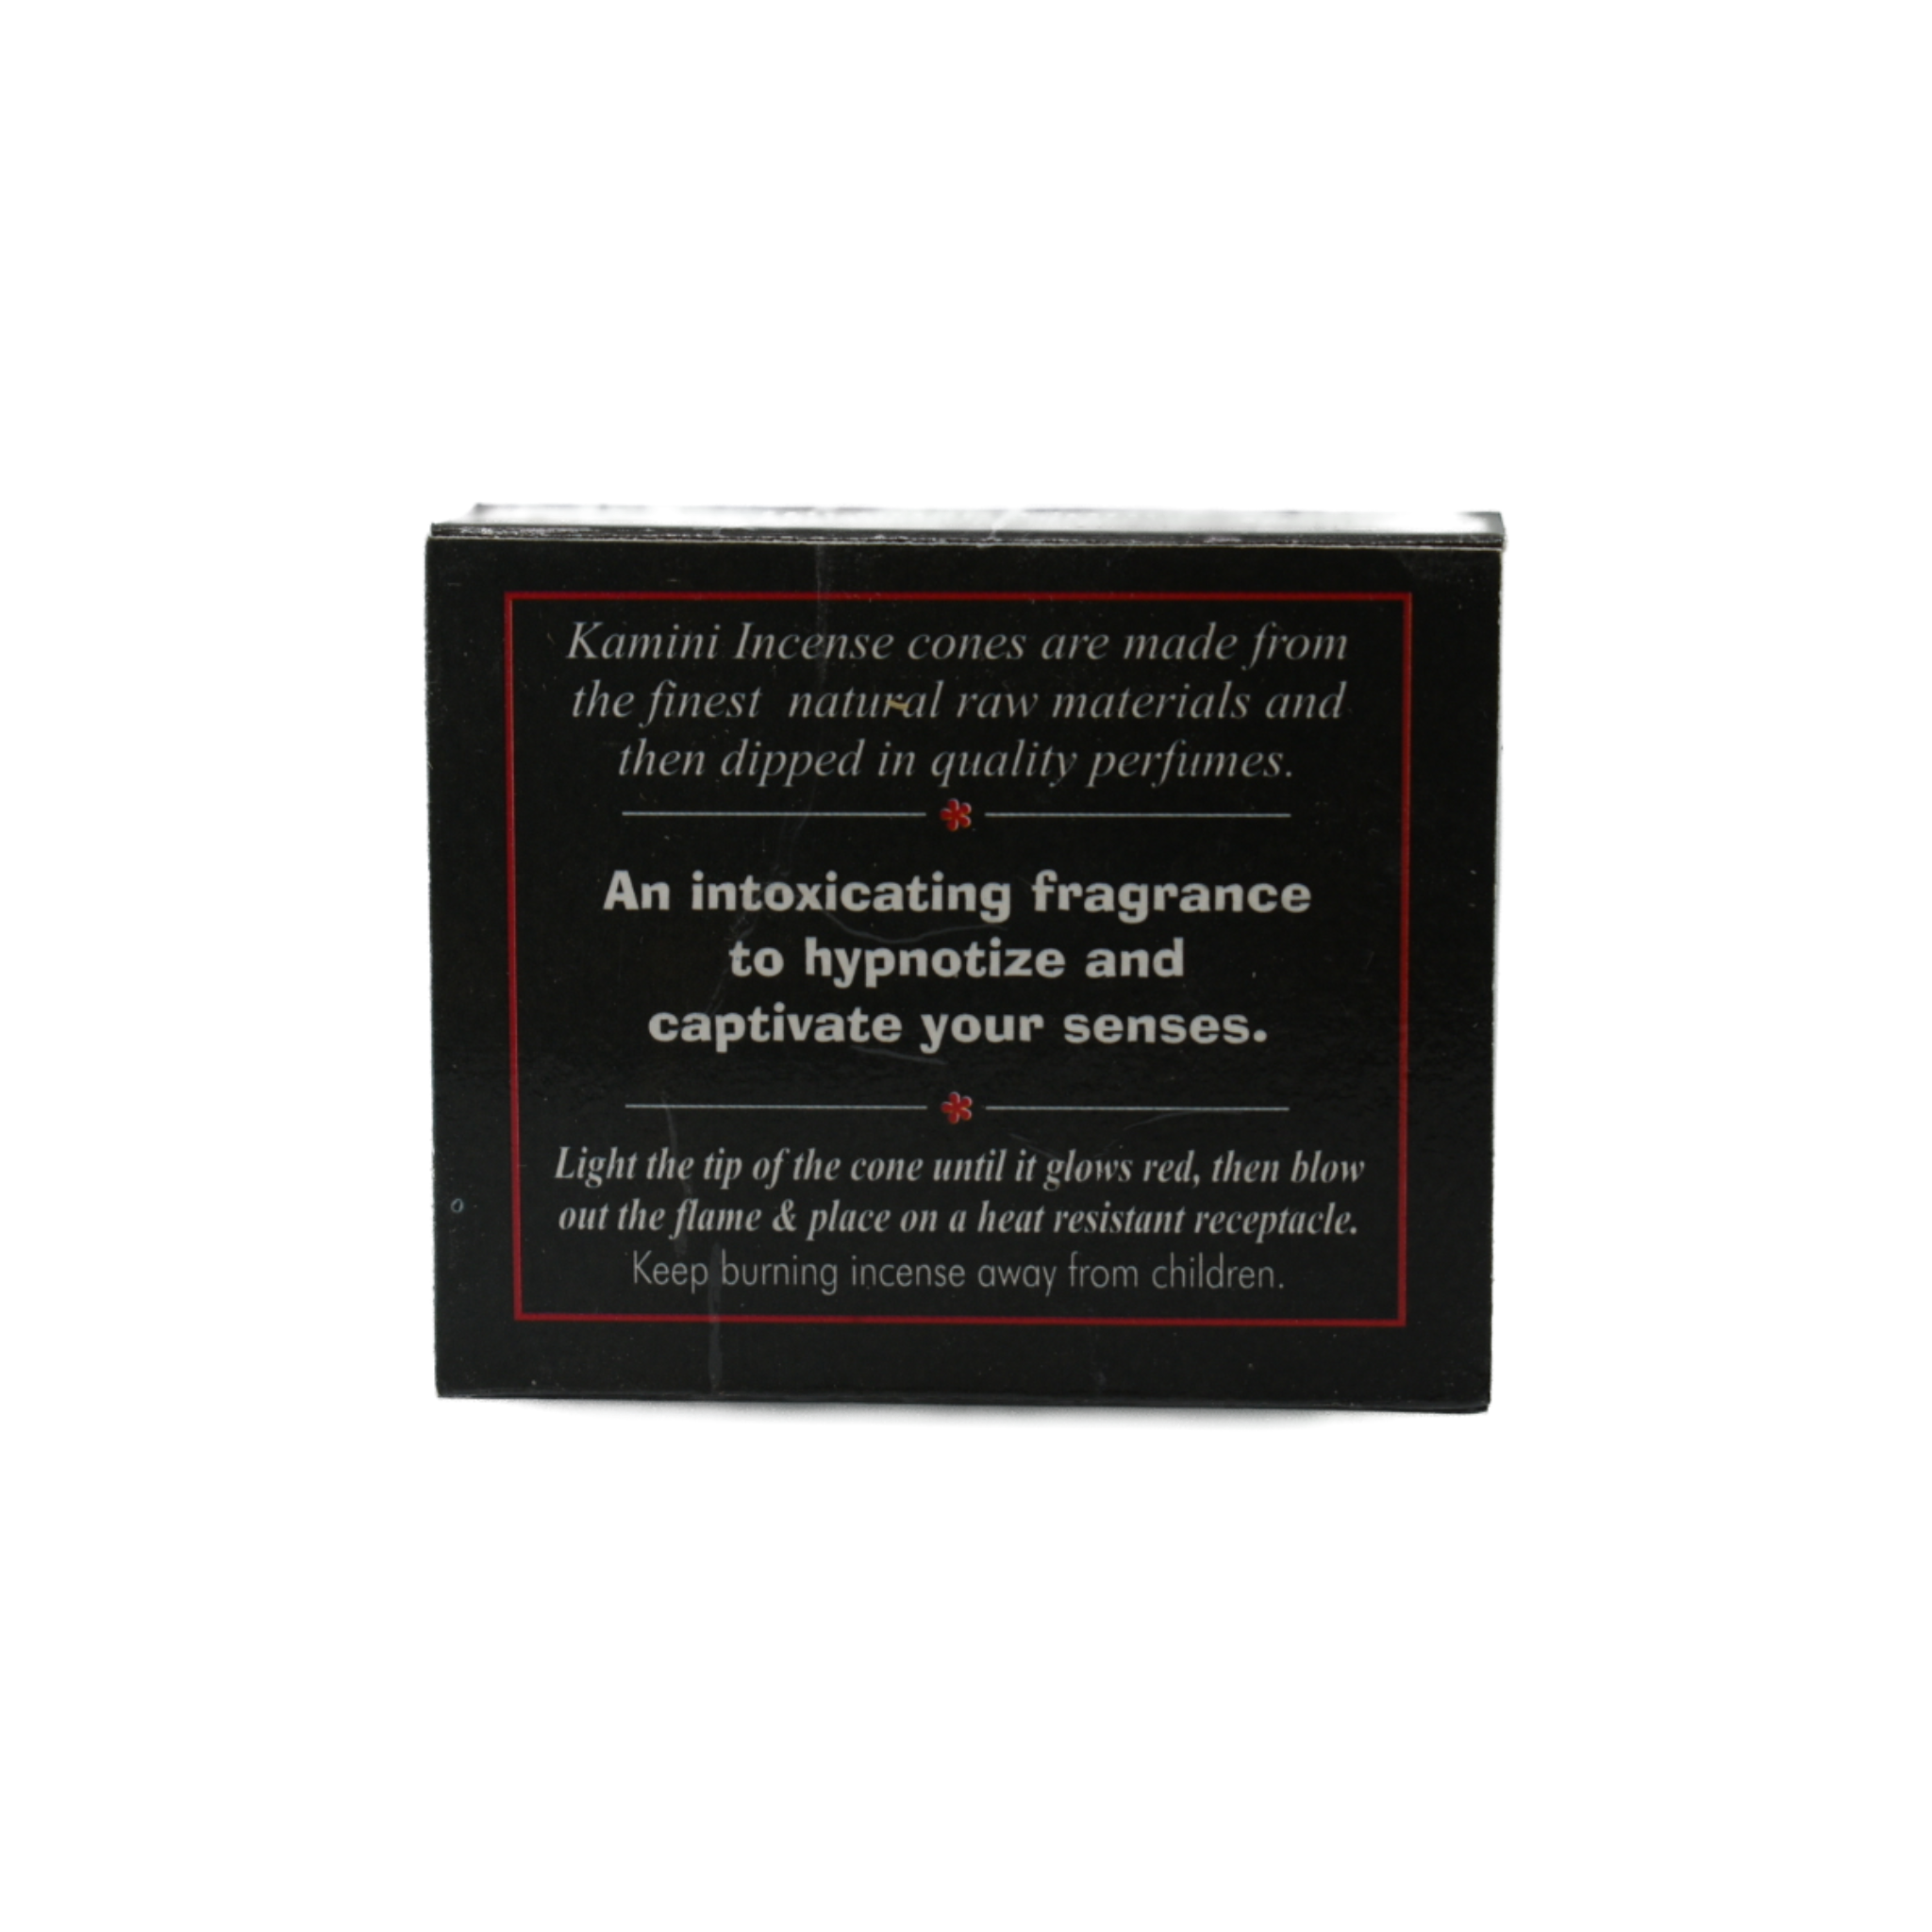 Poison Incense Cones back cover.  Kamini Incense cones are made from the finest natural raw materials and then dipped in quality perfumes.    An intoxicating fragrance to hypnotize and captive your senses.  Light the tip of the cone until it glows red, then blow out the flame and place on a heat resistant receptacle.  Keep burning incense away from children.